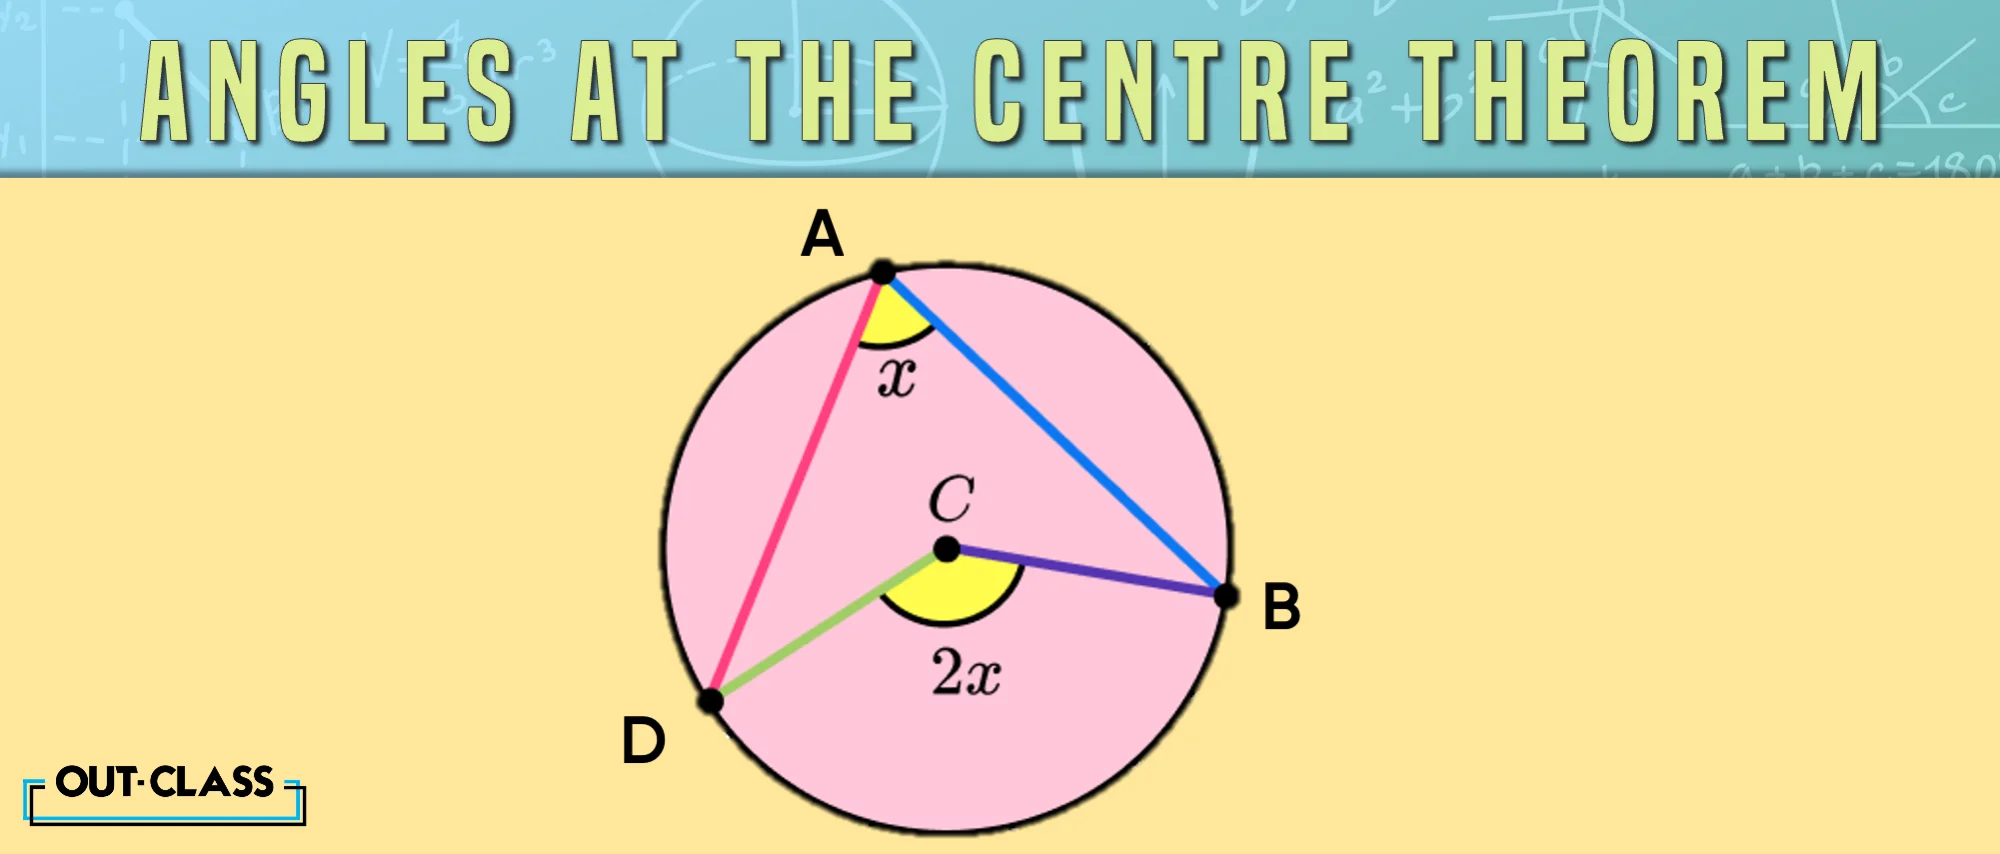 Another circle properties is the angle formed at the centre of a circle.